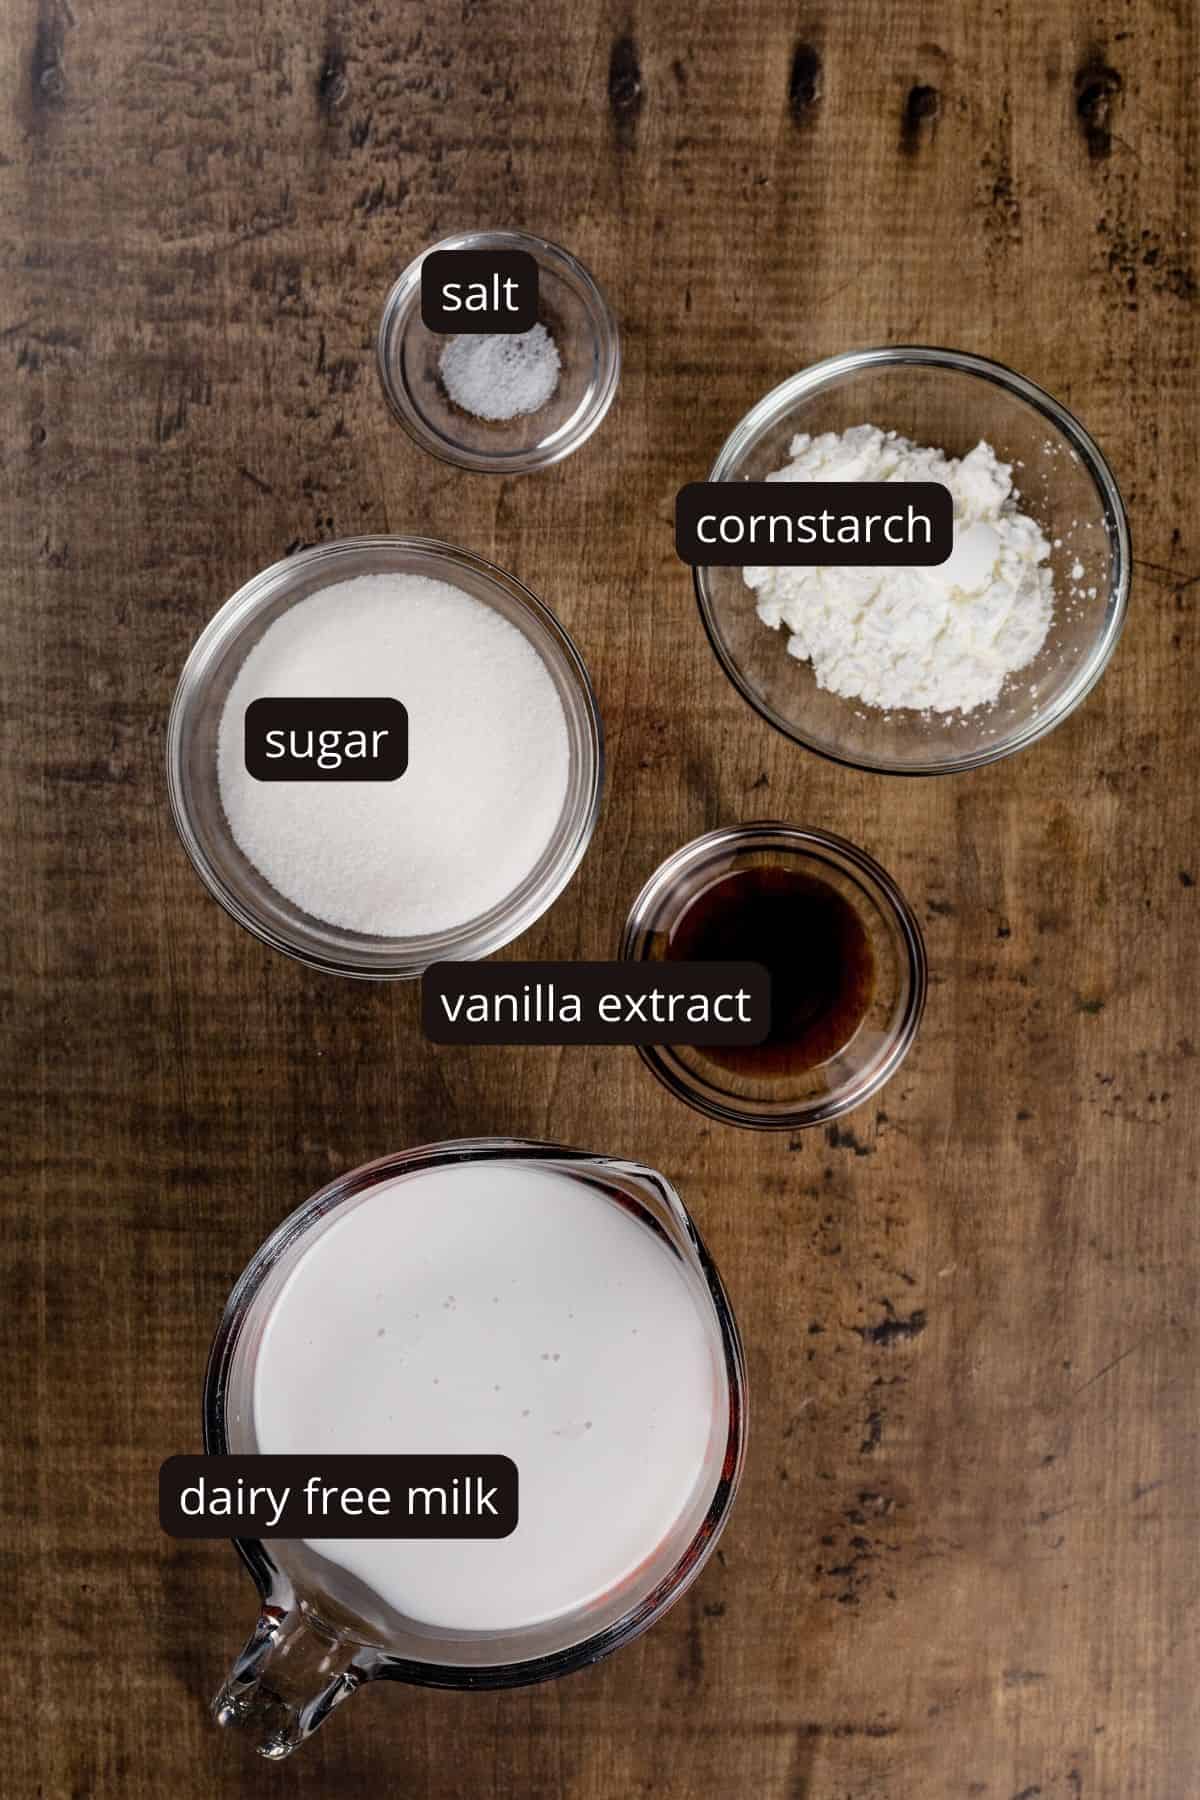 Ingredients for pudding in various glass bowls of different sizes rest on a wood table. Black and white labels have been added to name each ingredient.